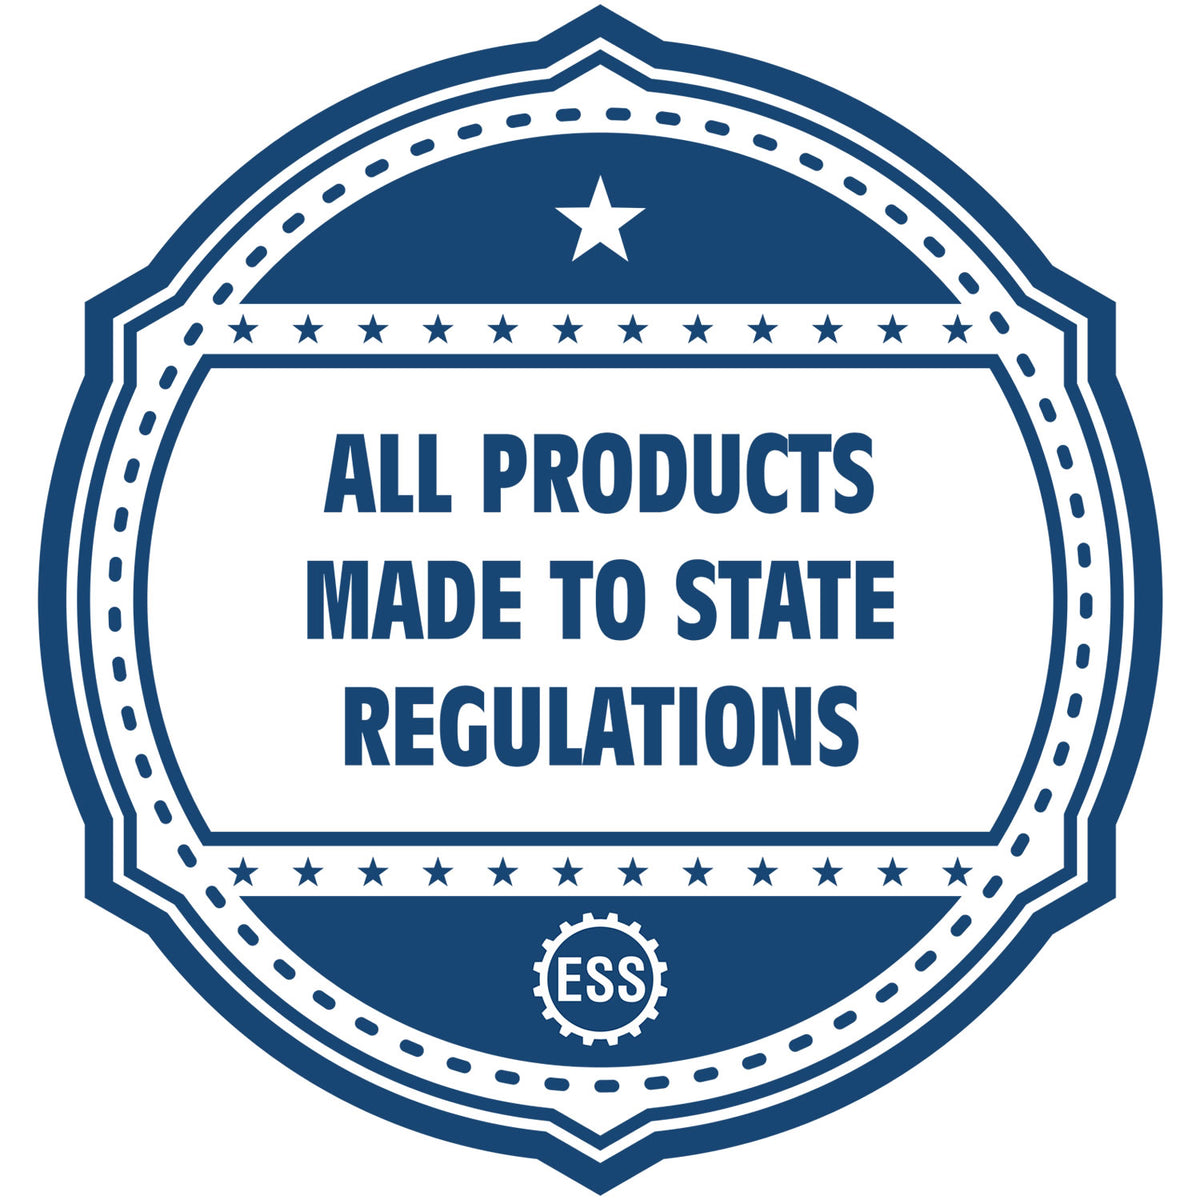 An icon or badge element for the Utah Engineer Desk Seal showing that this product is made in compliance with state regulations.